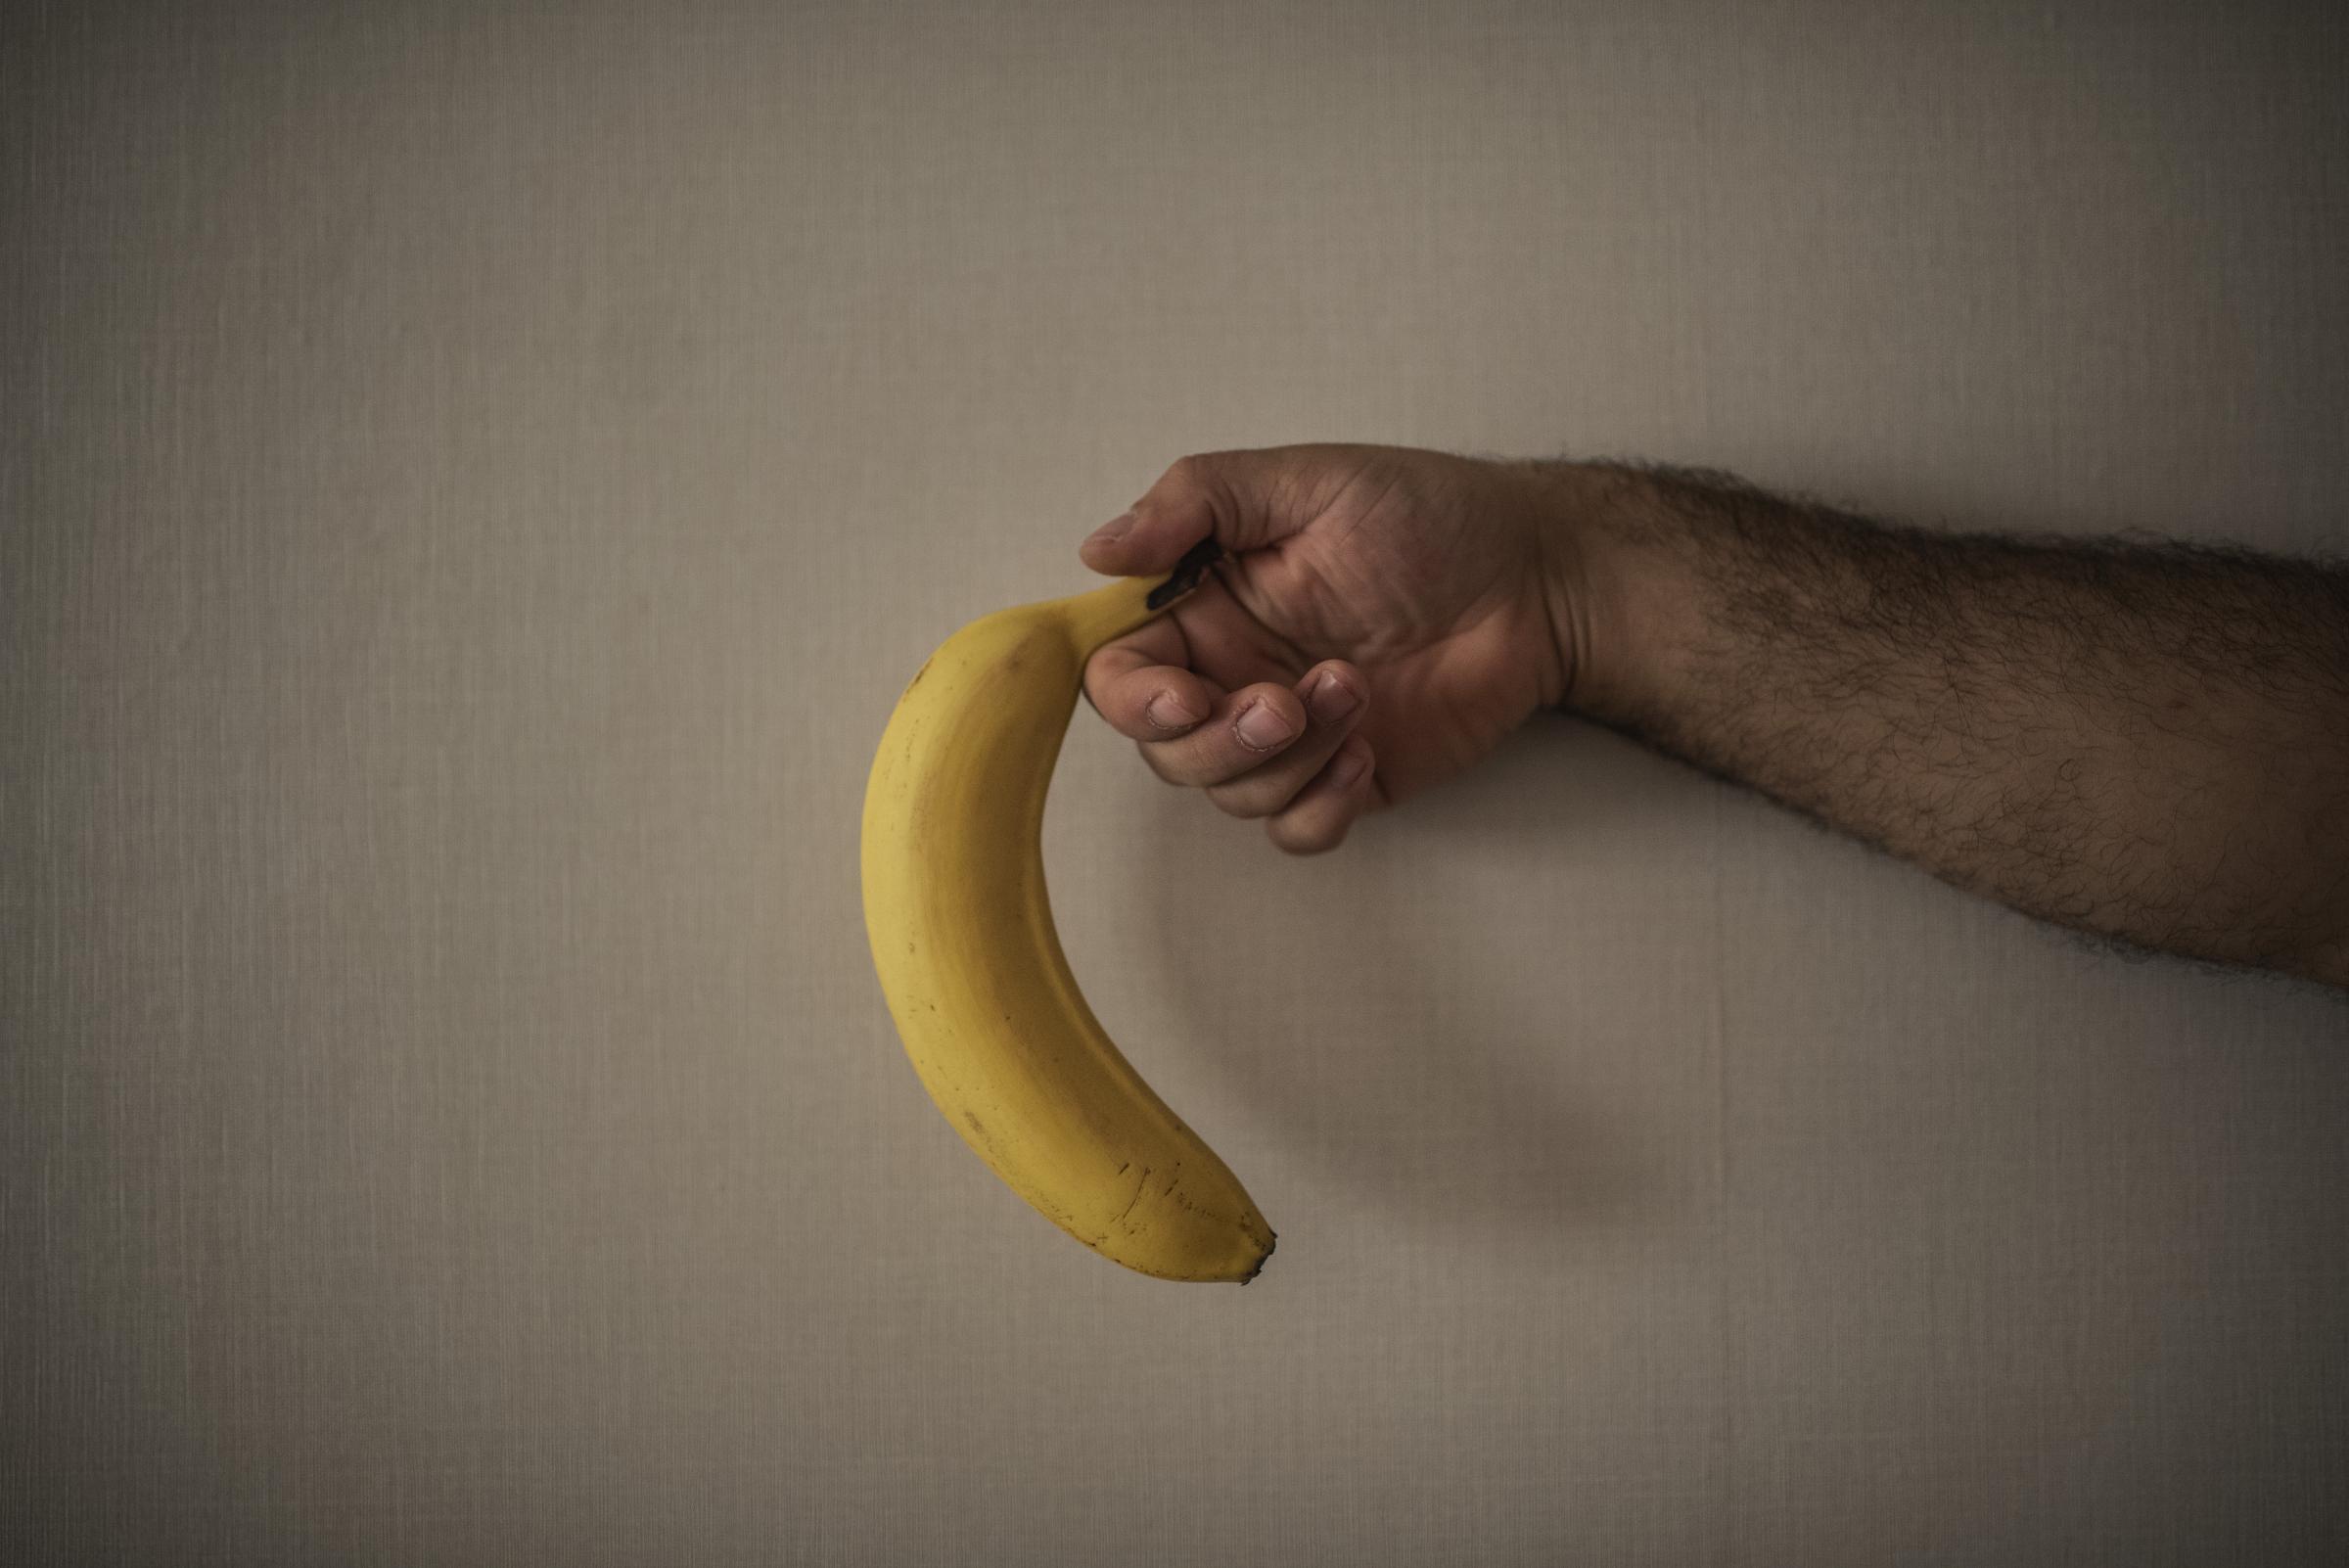 Queer in Iraq - In a non disclosed location M. shows a banana. This fruit...